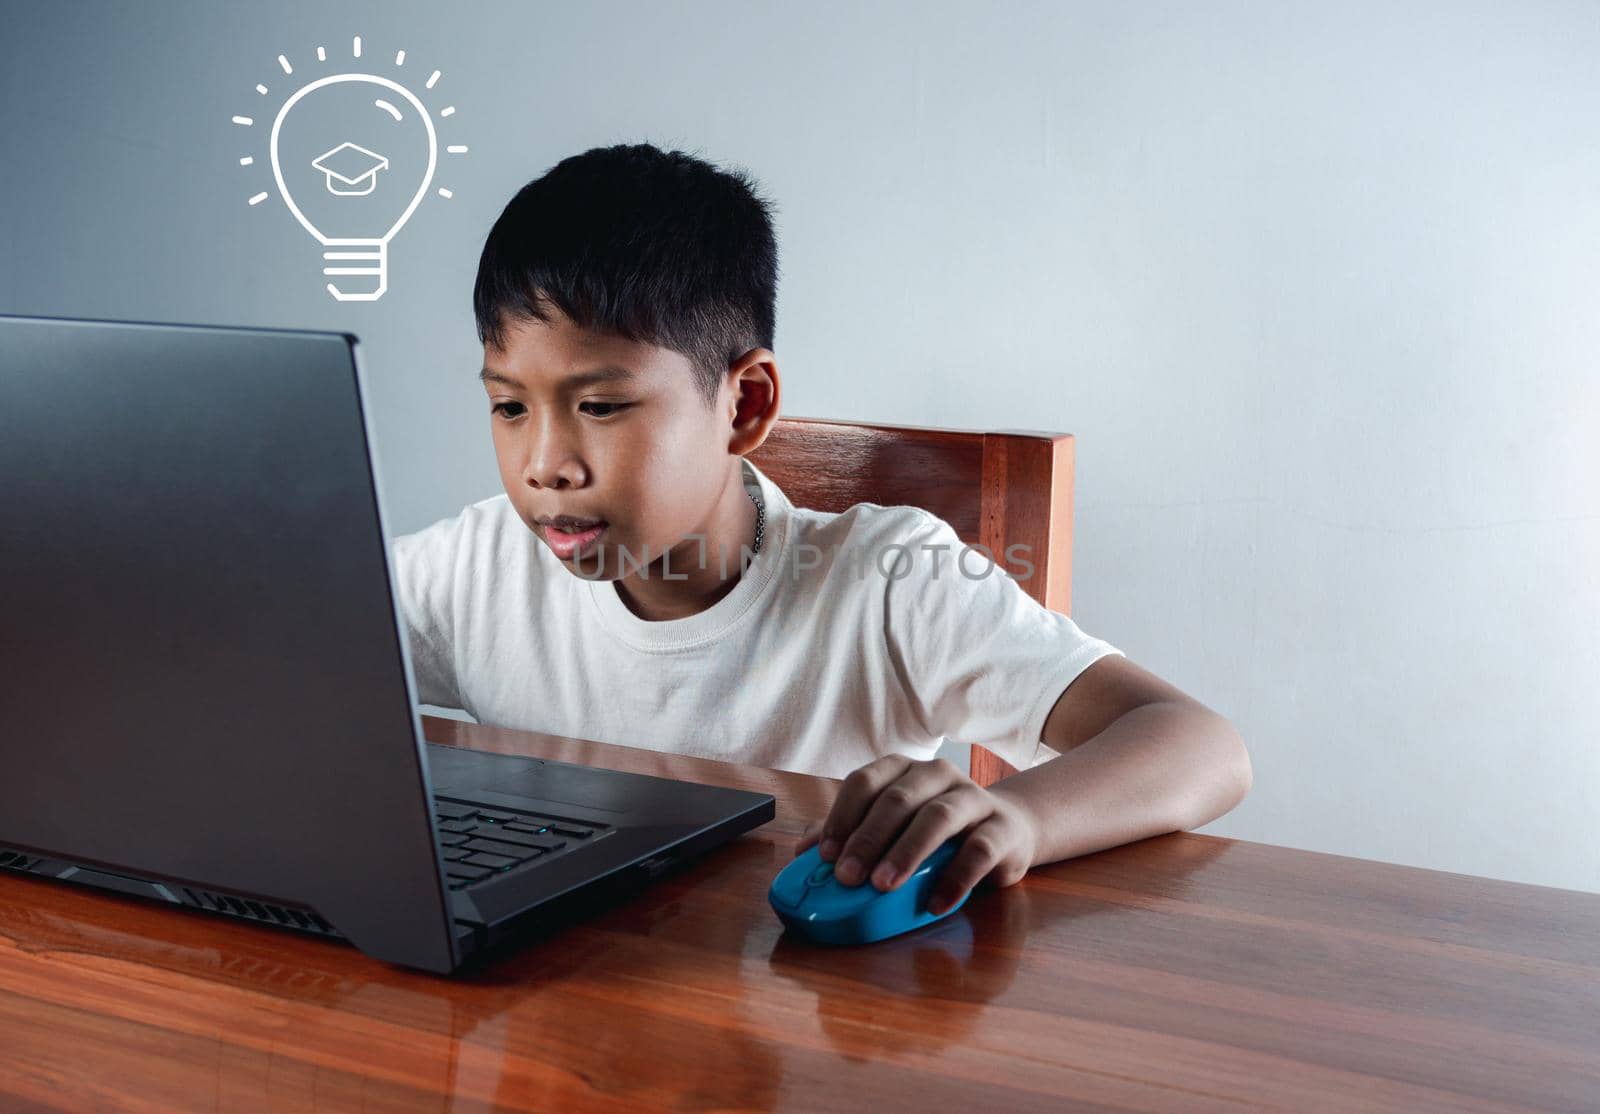 Education concept image. Creative idea and innovation. boy sitting staring at computer and there is a light bulb icon next to it.